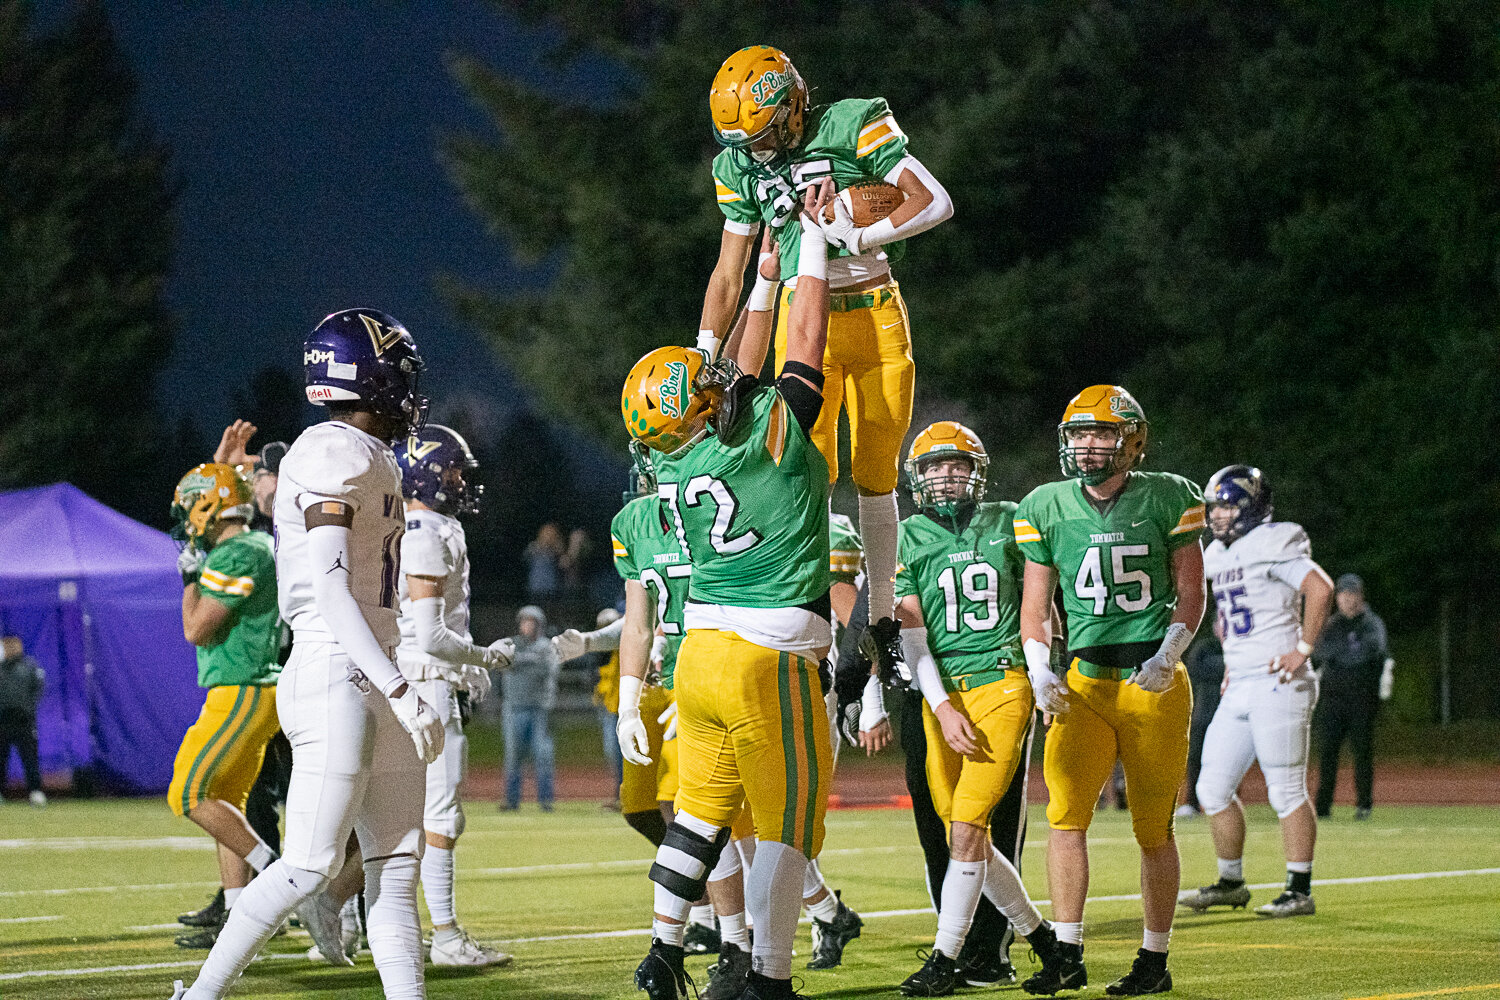 Brady Larson lifts up Kooper Clark after Clark's touchdown to start the scoring in Tumwater's 19-17 win over North Kitsap in the 2A state semifinals on Nov. 25.